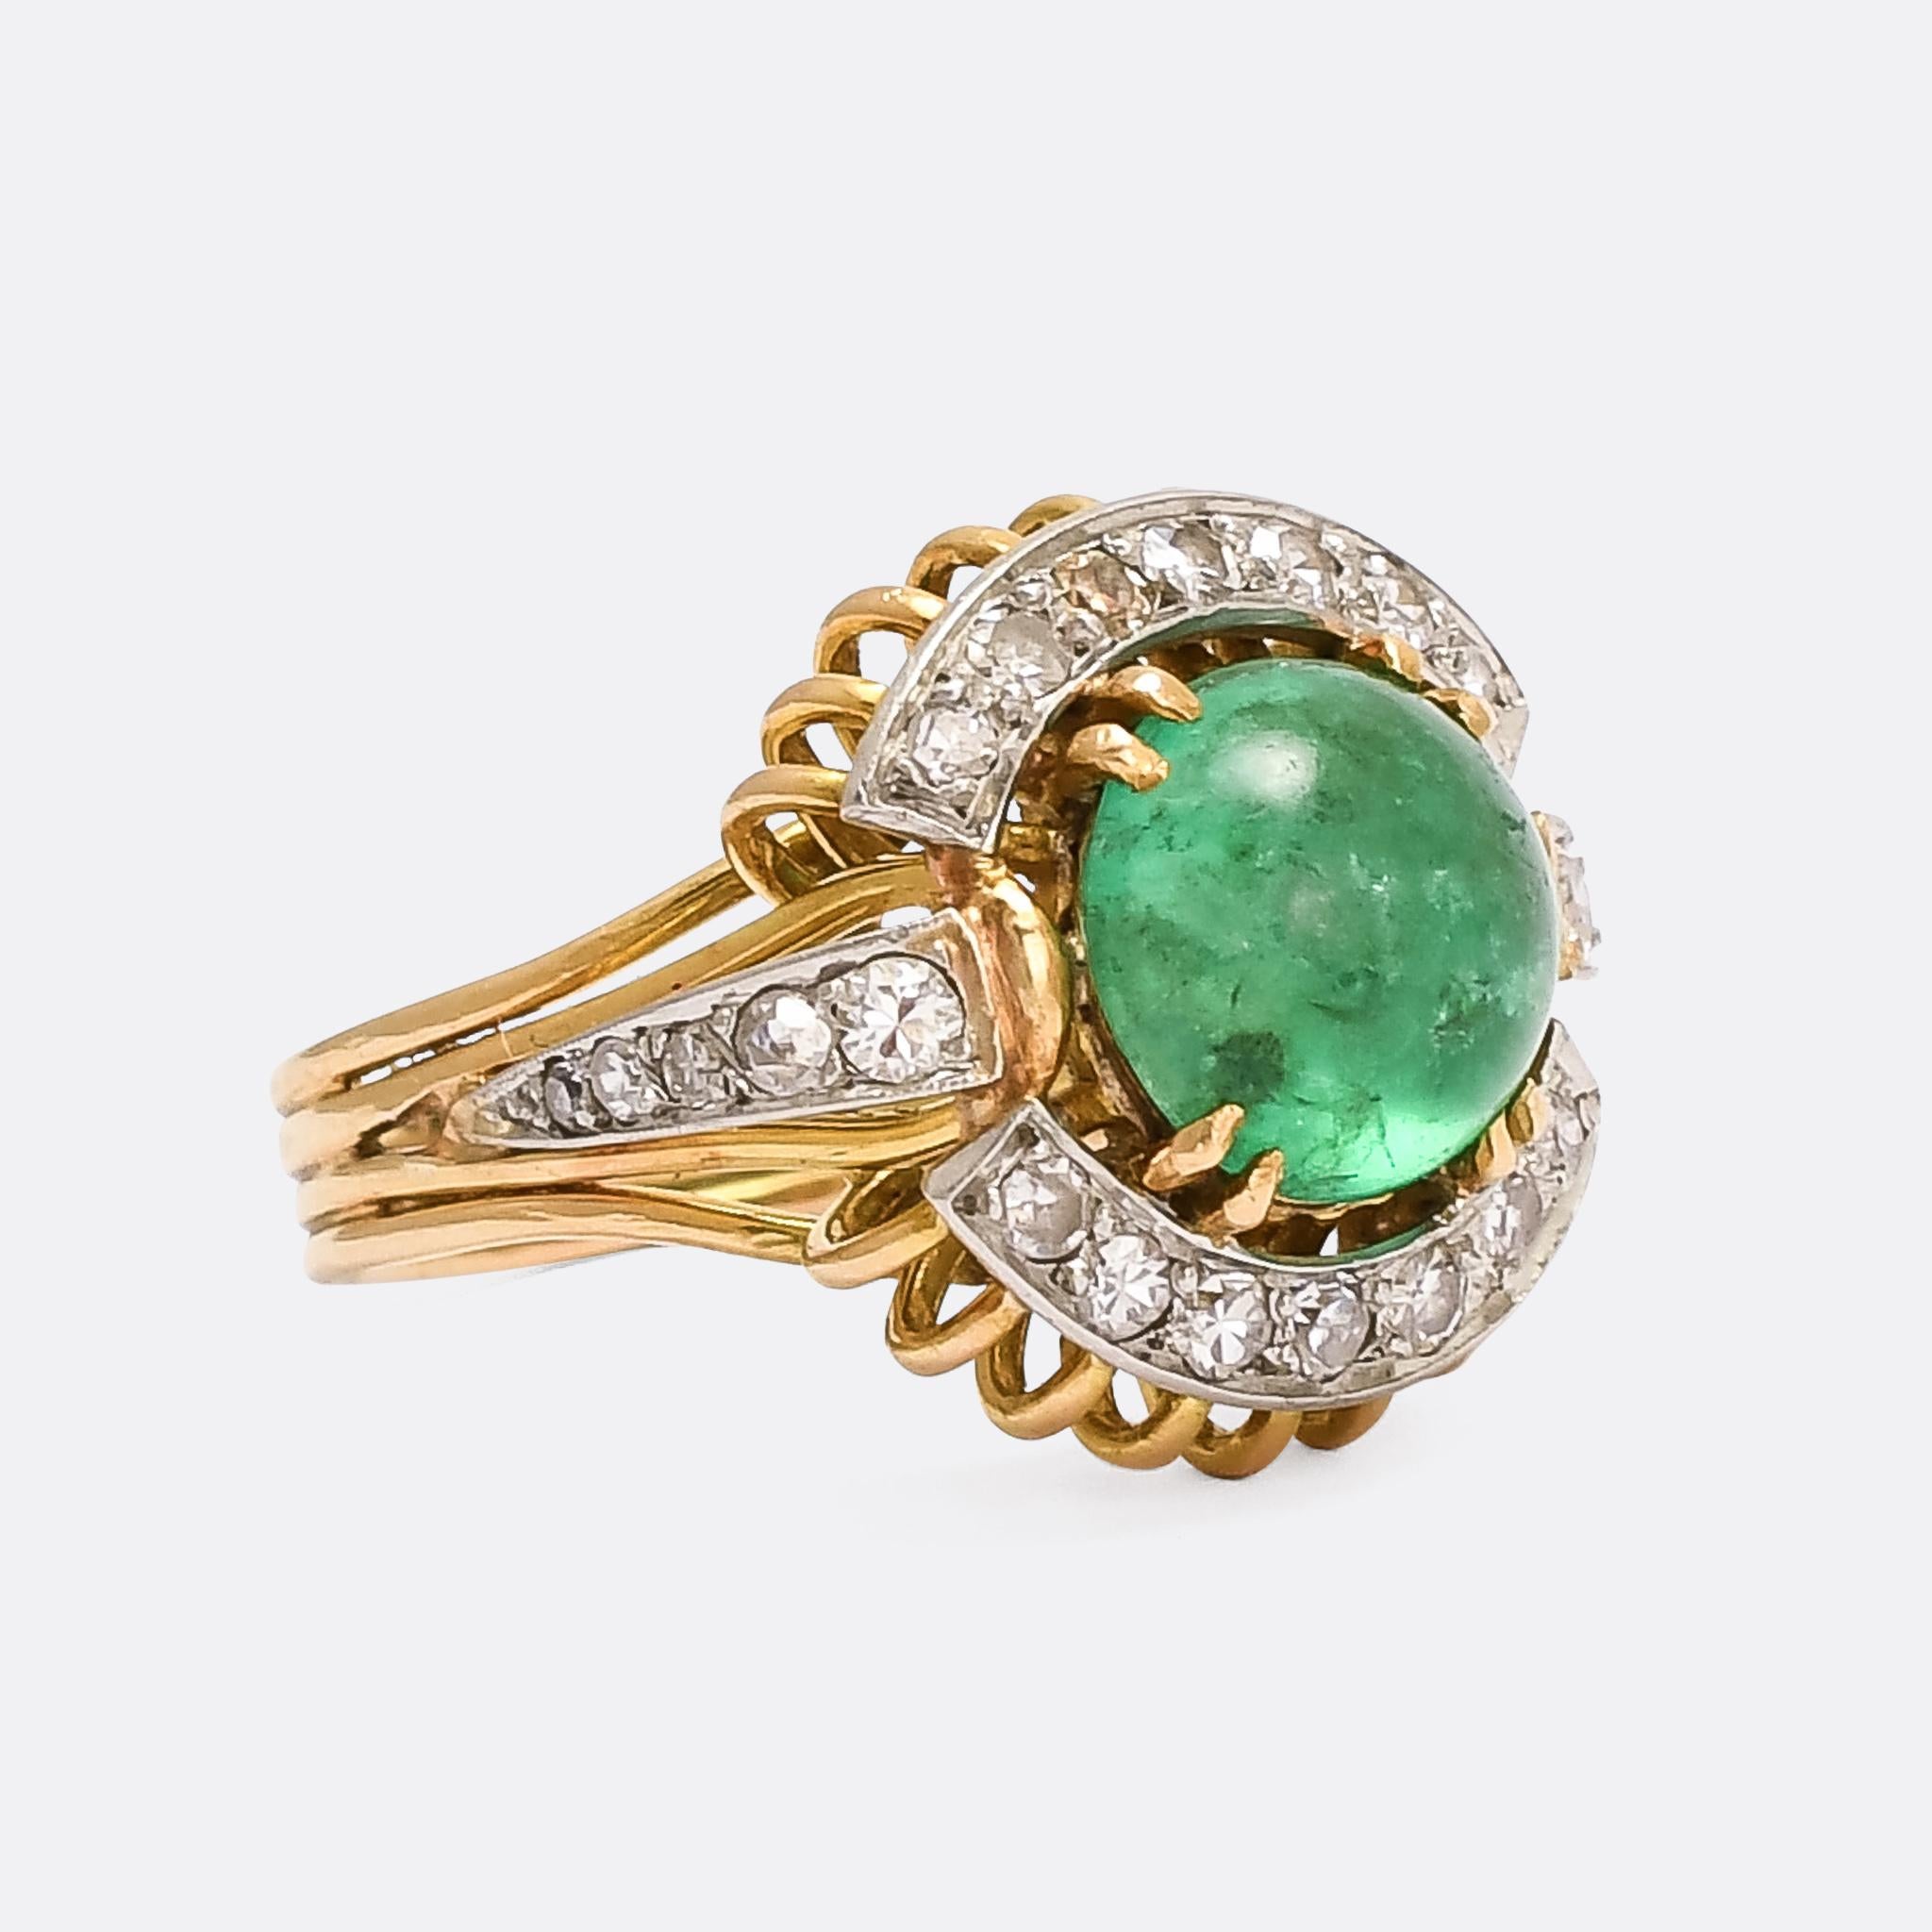 A striking 1960s cocktail ring set with a central cabochon emerald and a cluster of bright eight-cut diamonds. It's crafted in 18 karat gold with millegrain platinum settings and an unusual gold wirework gallery. French import marks indicate that it